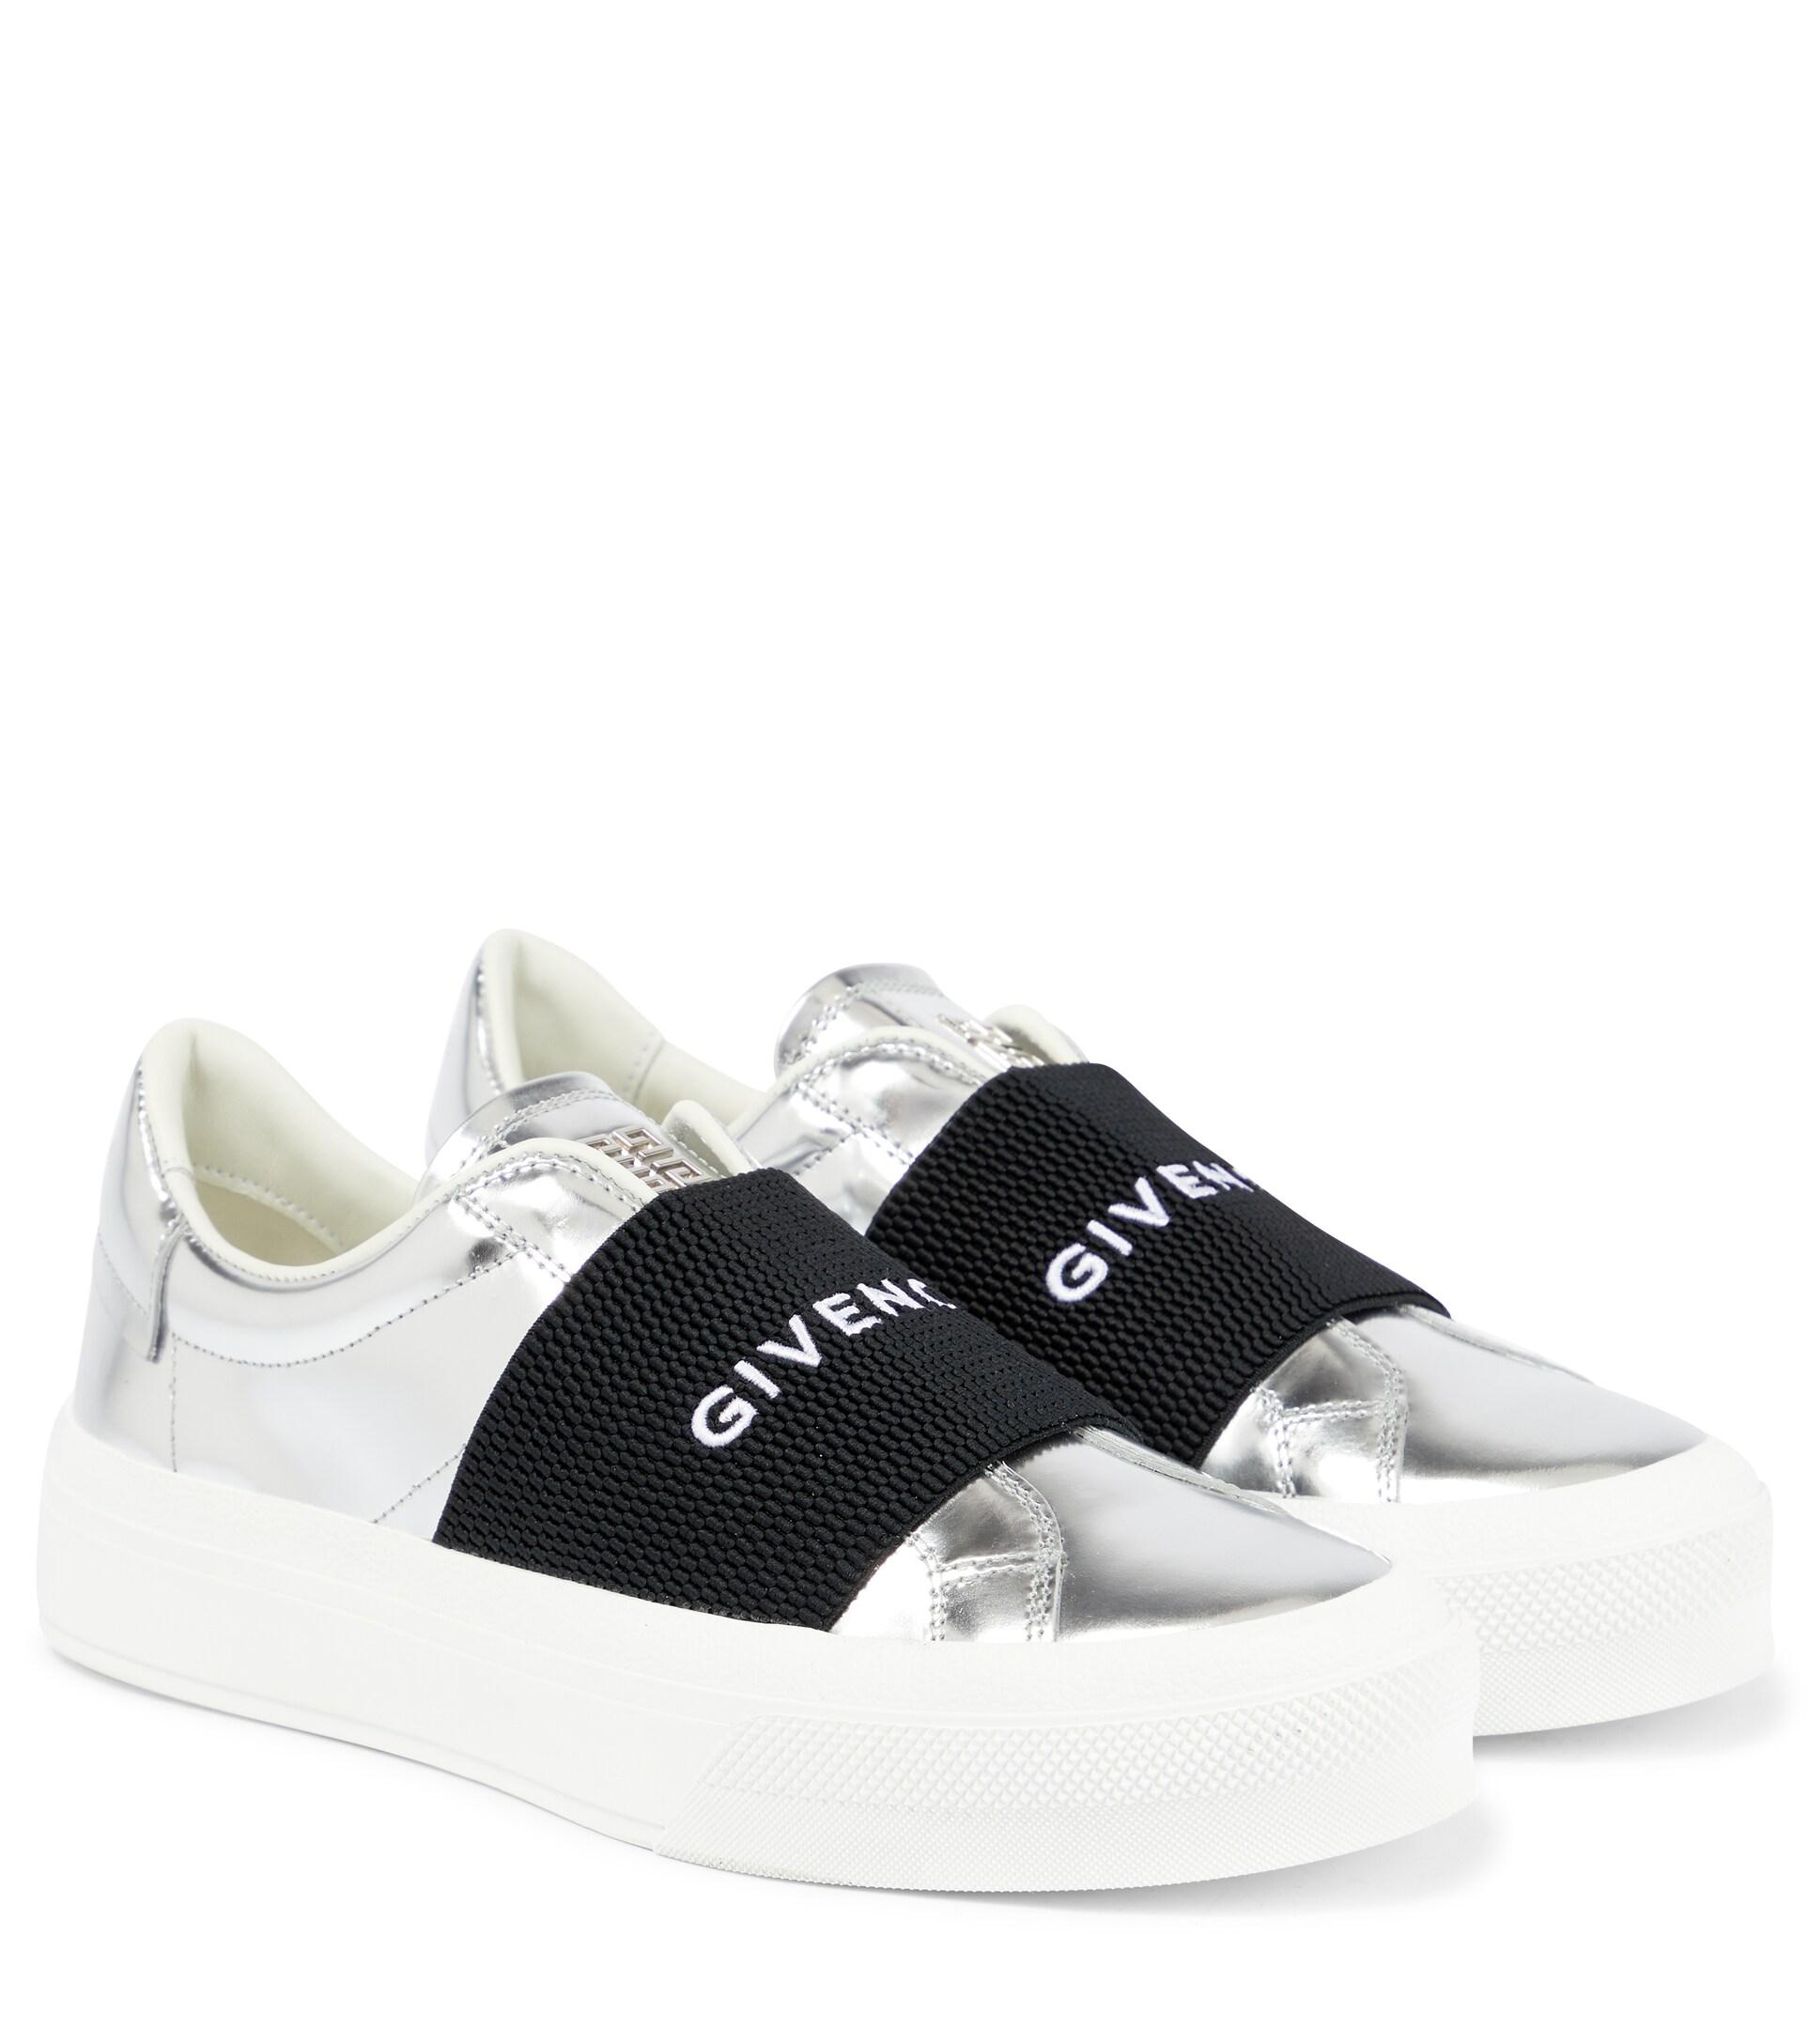 Givenchy Wing Low Leather Sneakers 'Black & White' | Sneakers black, Leather  sneakers, Givenchy sneakers